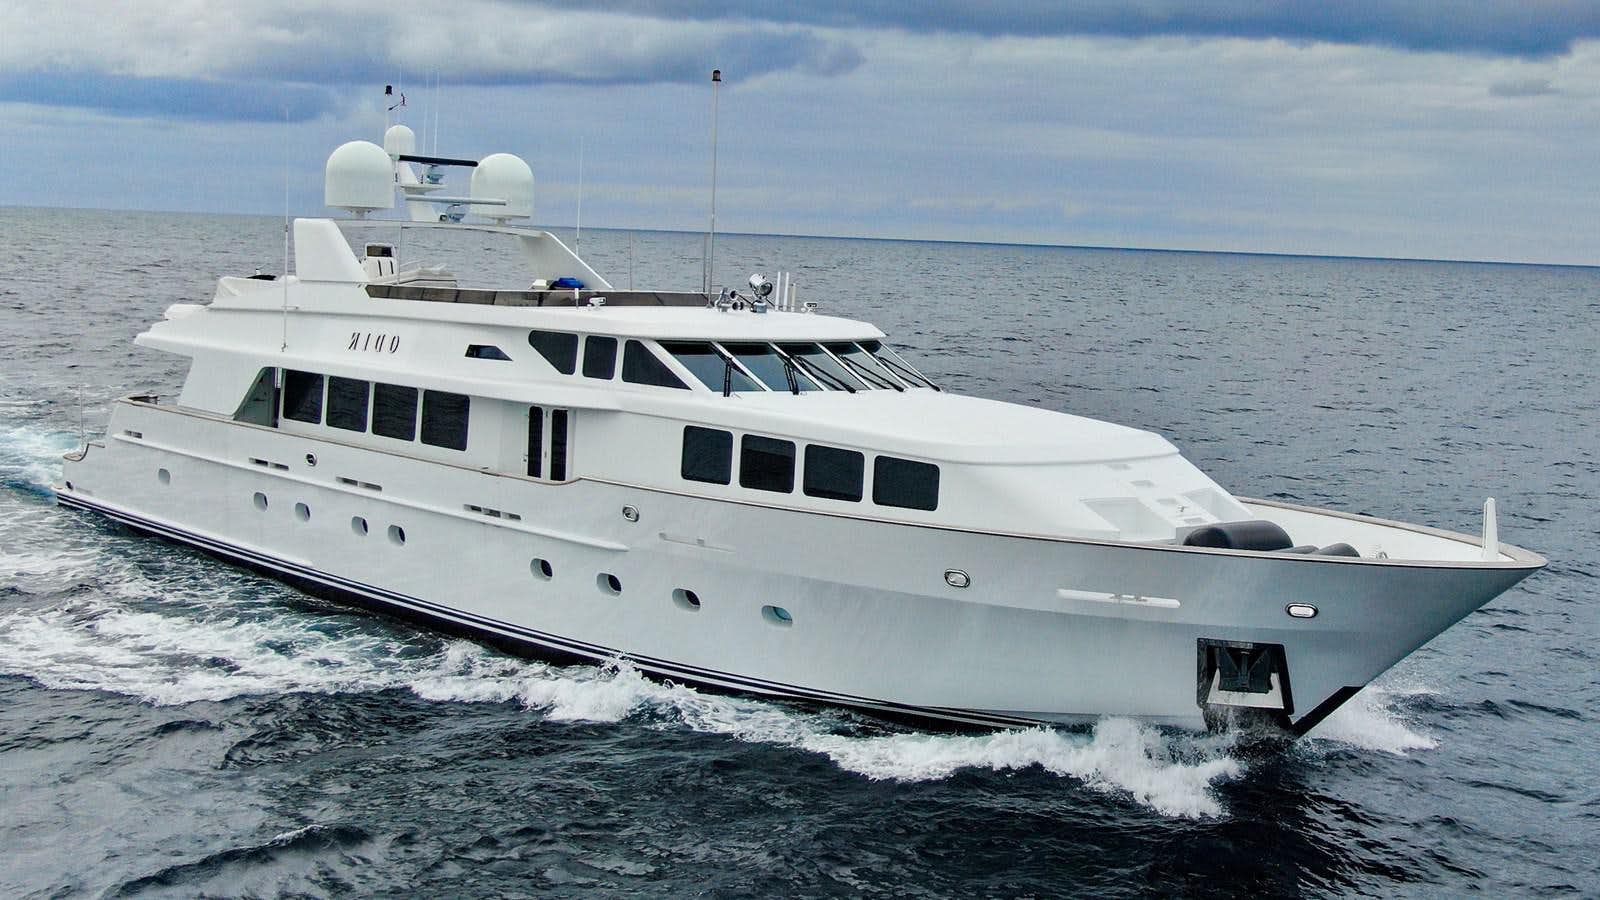 Watch Video for ODIN Yacht for Sale